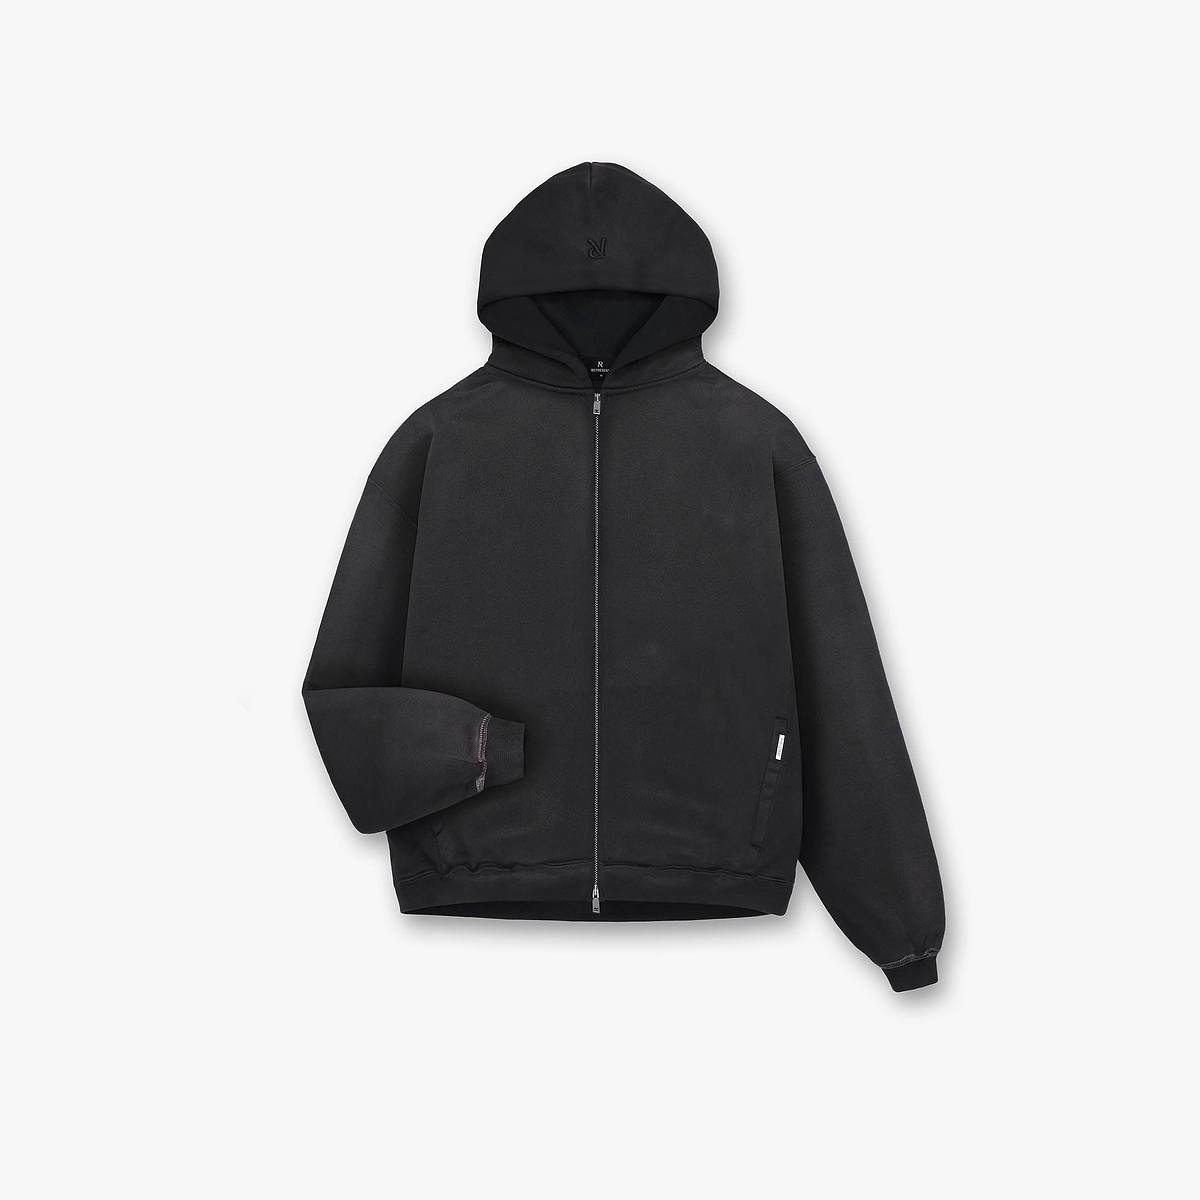 Heavyweight Initial Zip Hoodie | Stained Black | REPRESENT CLO